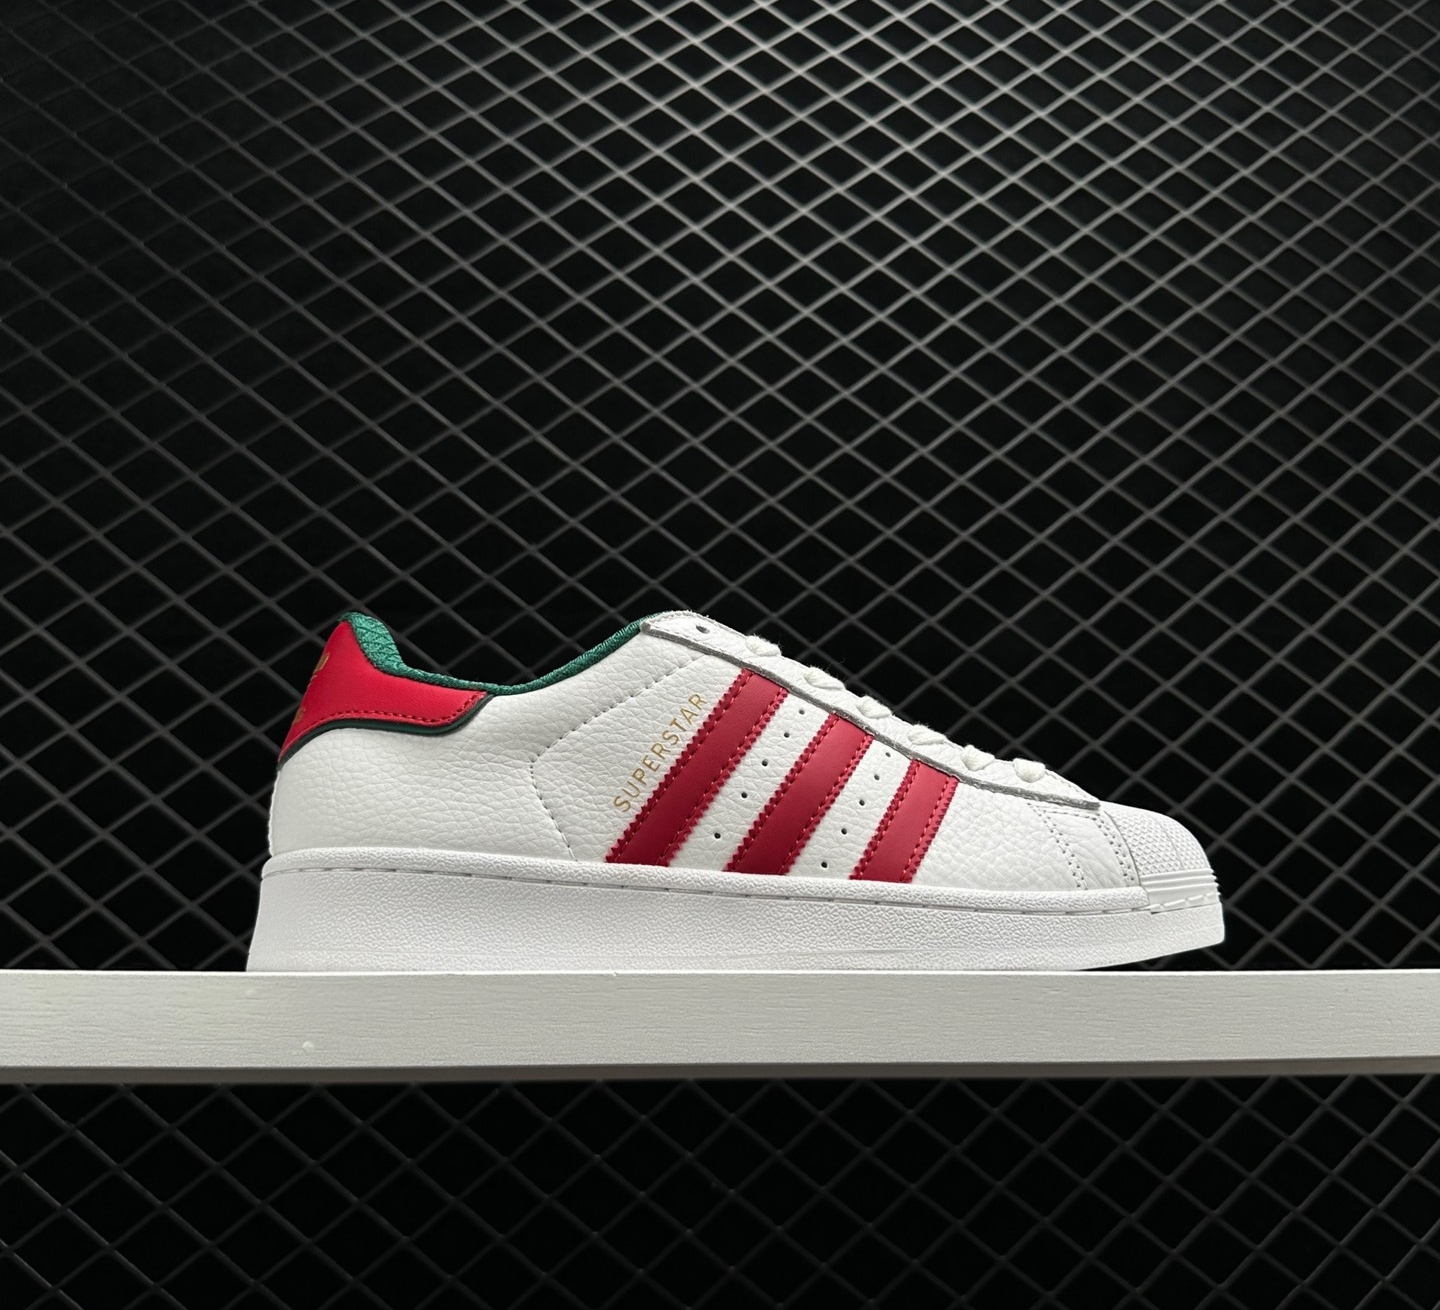 Adidas Originals Superstar White Green Red D96974 - Stylish Athletic Sneakers